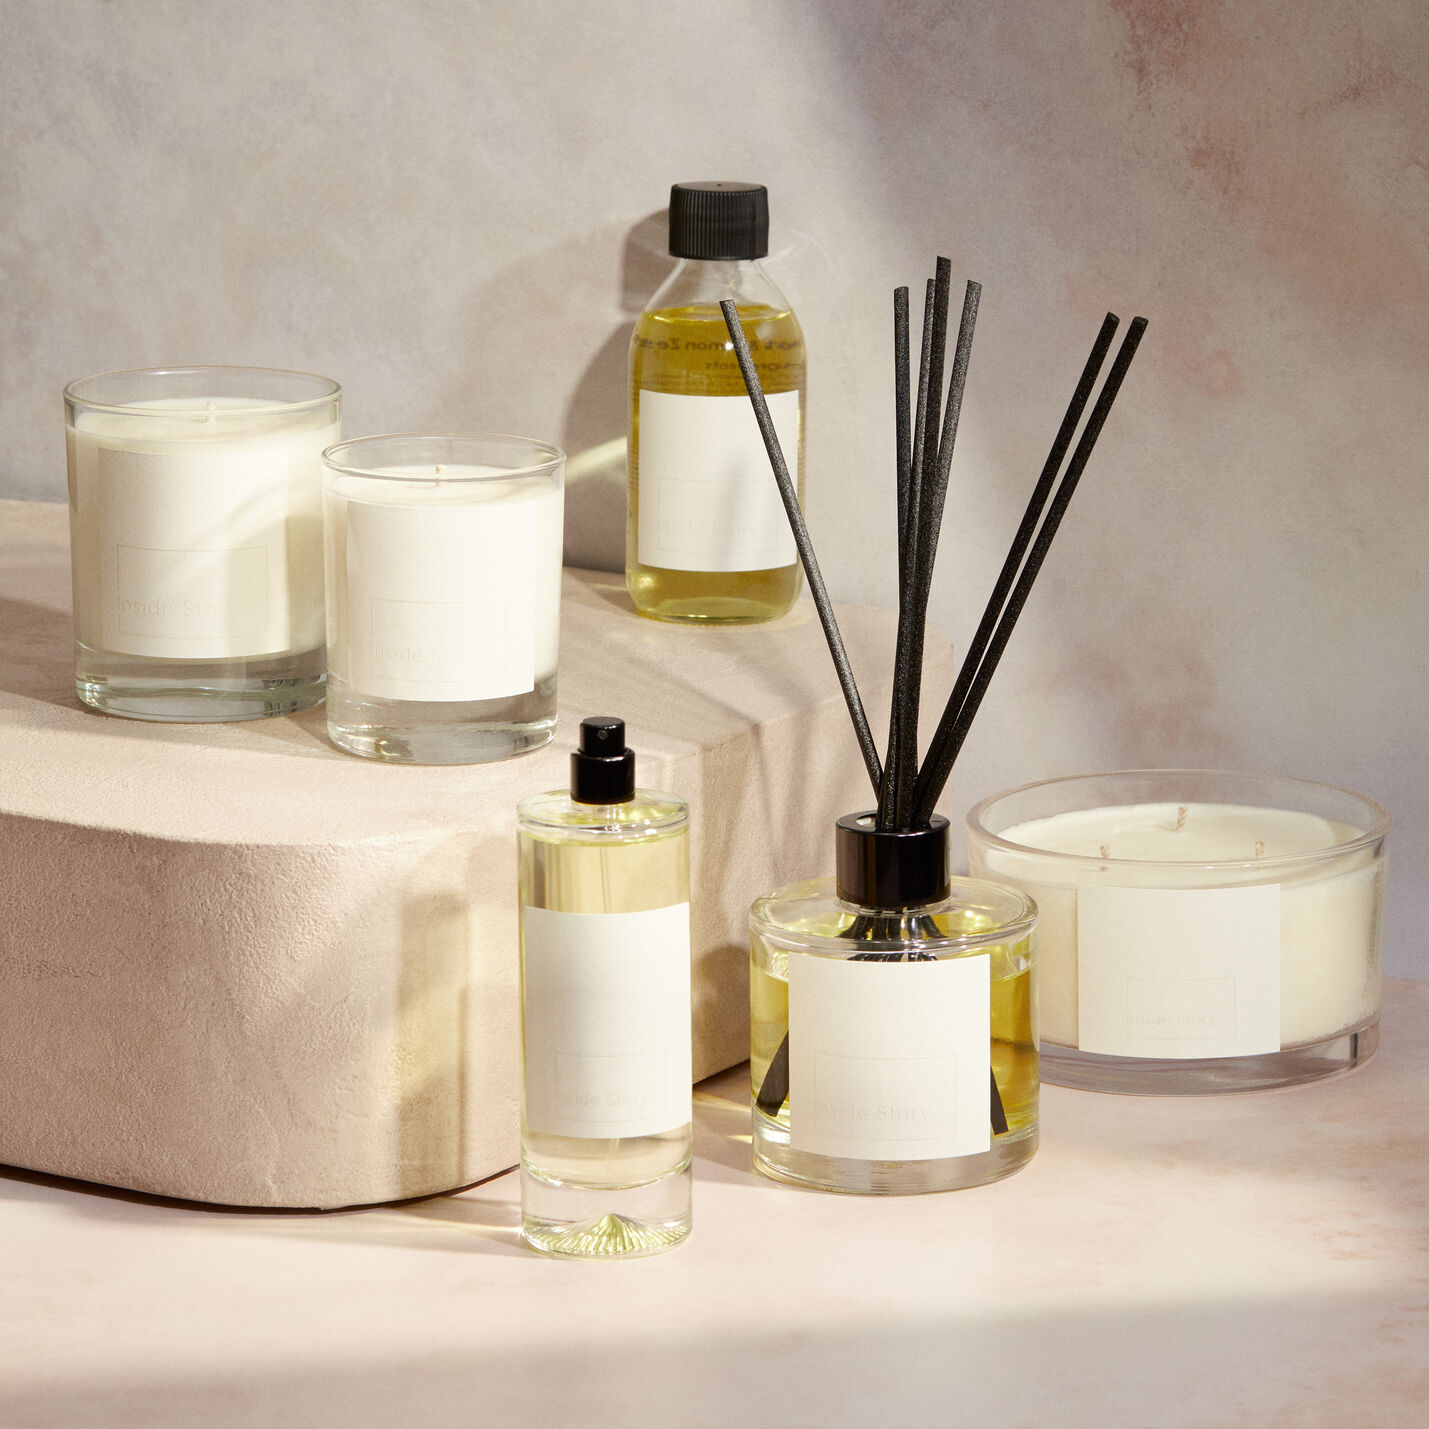 Cucumber and rose home fragrance collection